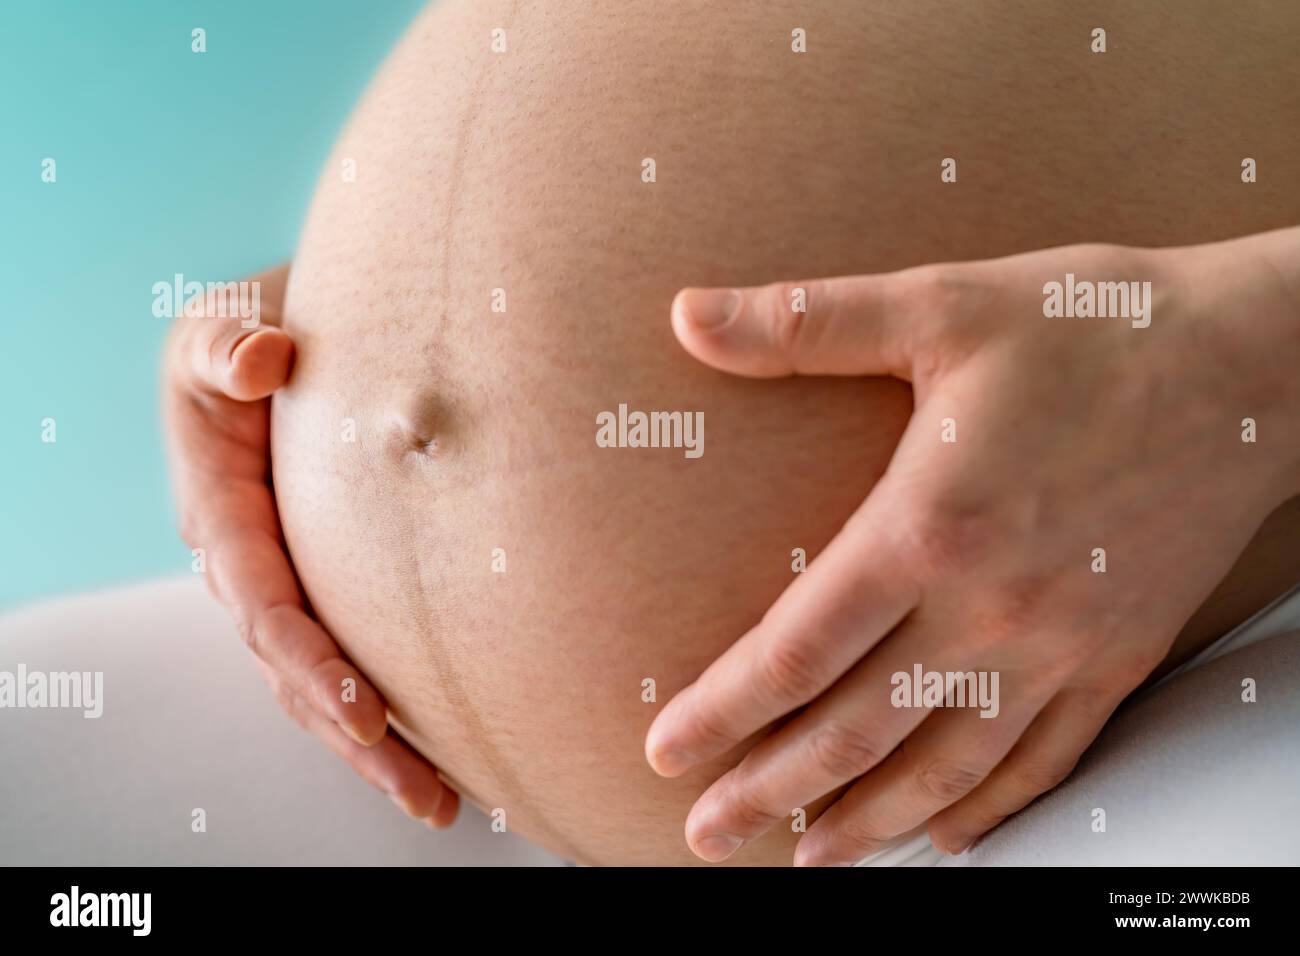 Description: Closeup of a sitting woman gently holding her very round pregnant baby bump. Side angle view. Turquoise background. Bright shot. Black an Stock Photo